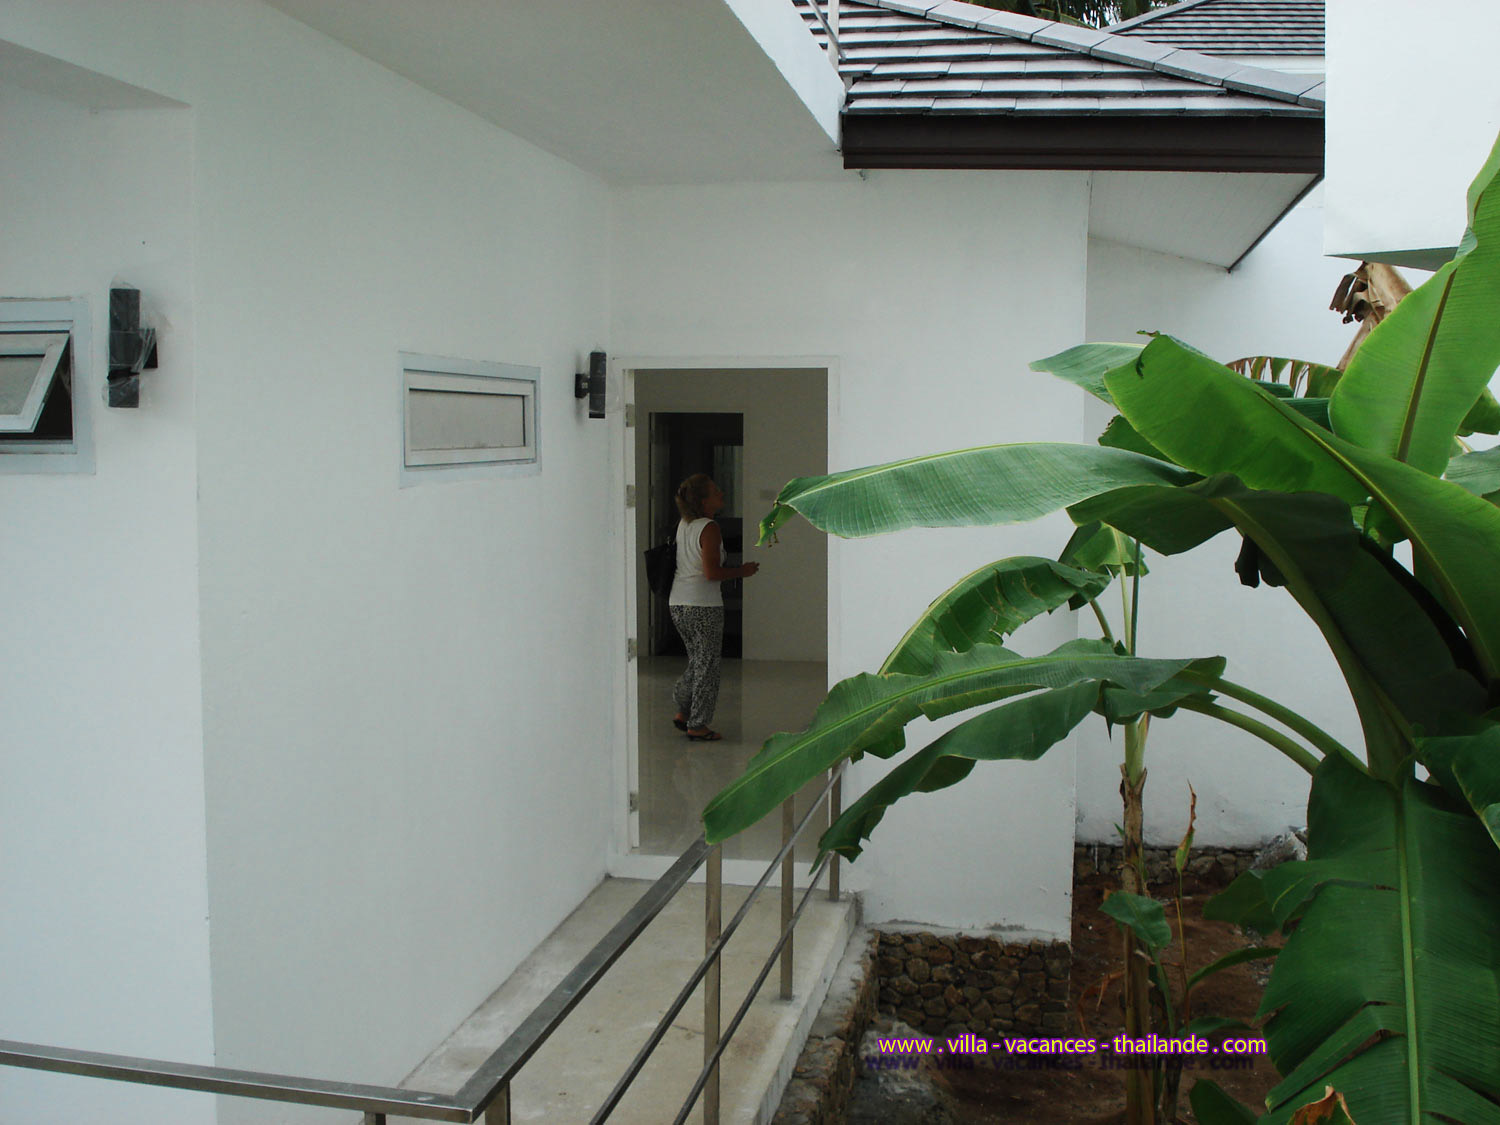 photo 4 English holiday villa rental thailand entry home-chaweng Koh Samui for 4 people 5 people 6 people 